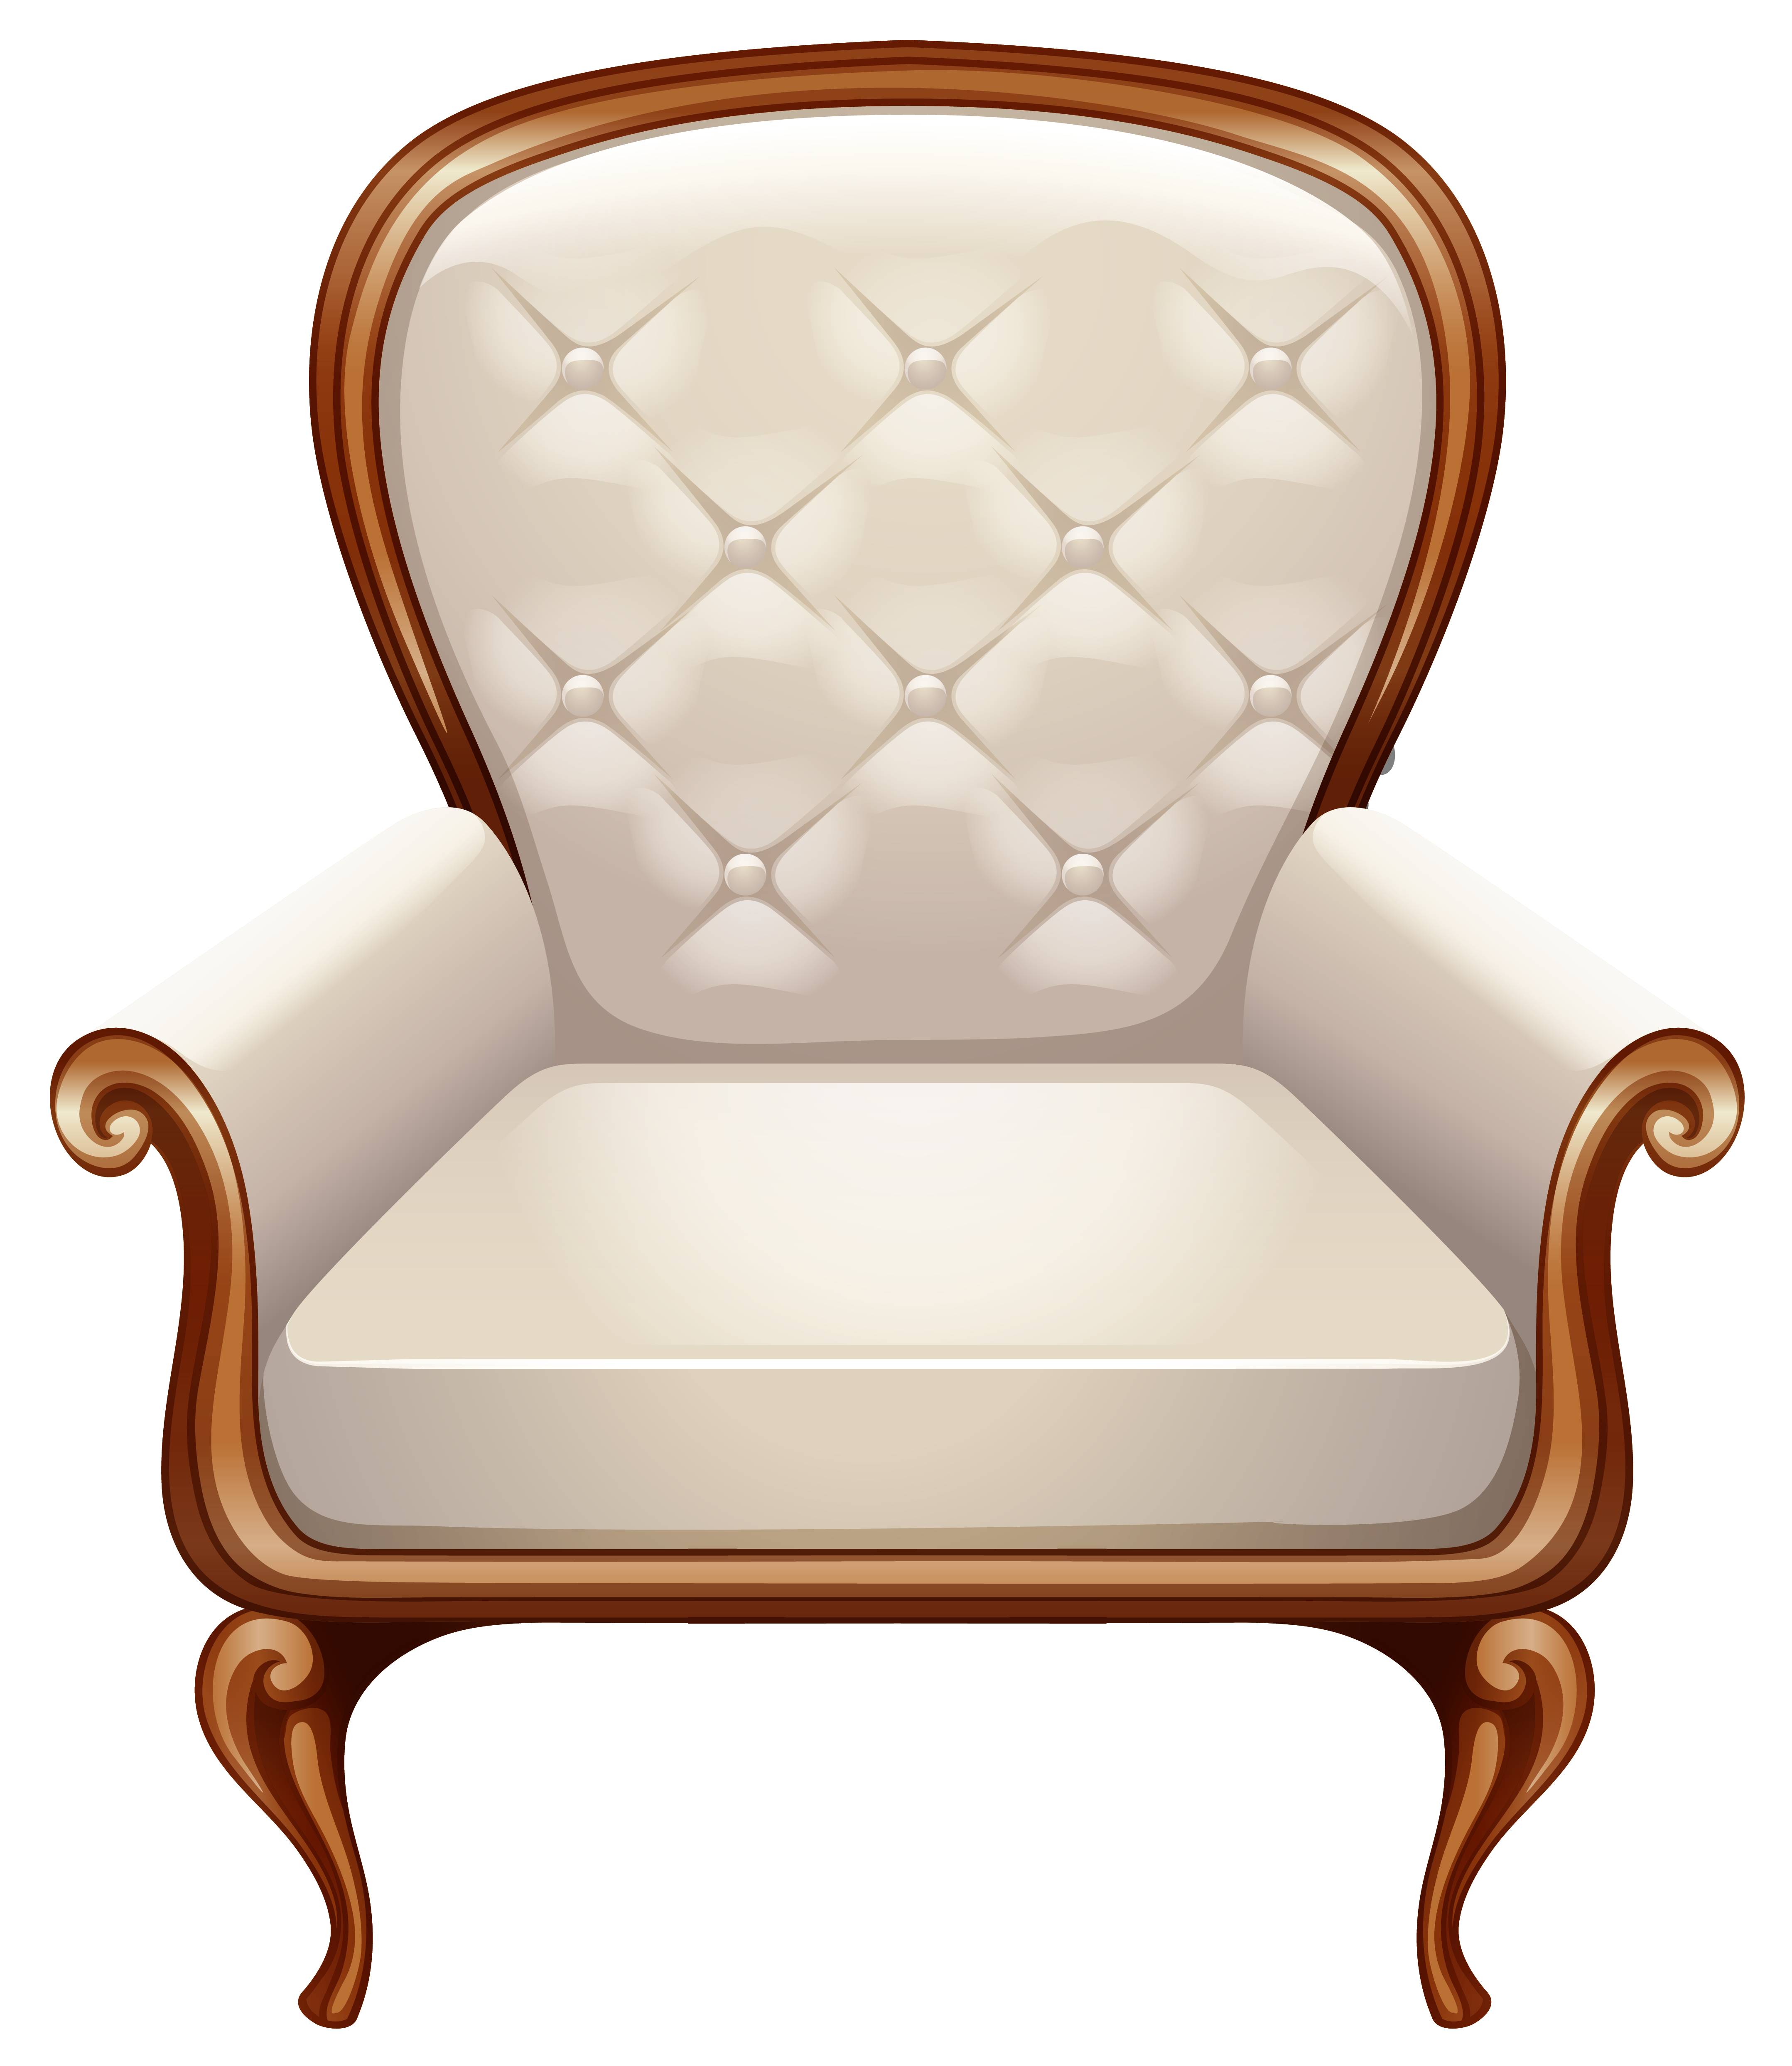 Arm Chair PNG Clipart Image | Gallery Yopriceville - High-Quality